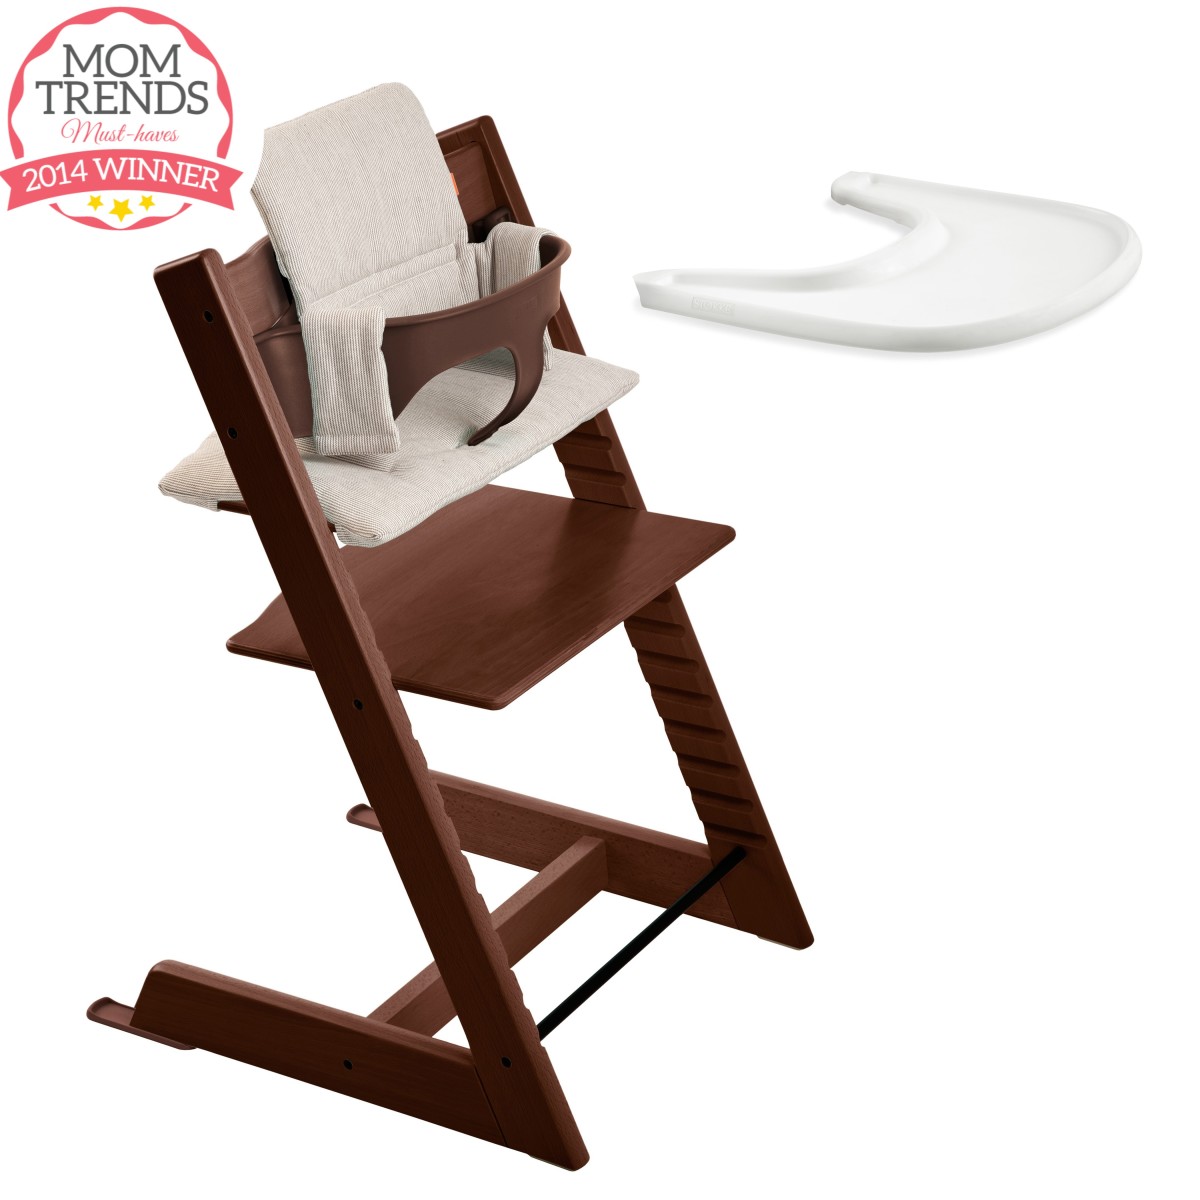 table top high chair